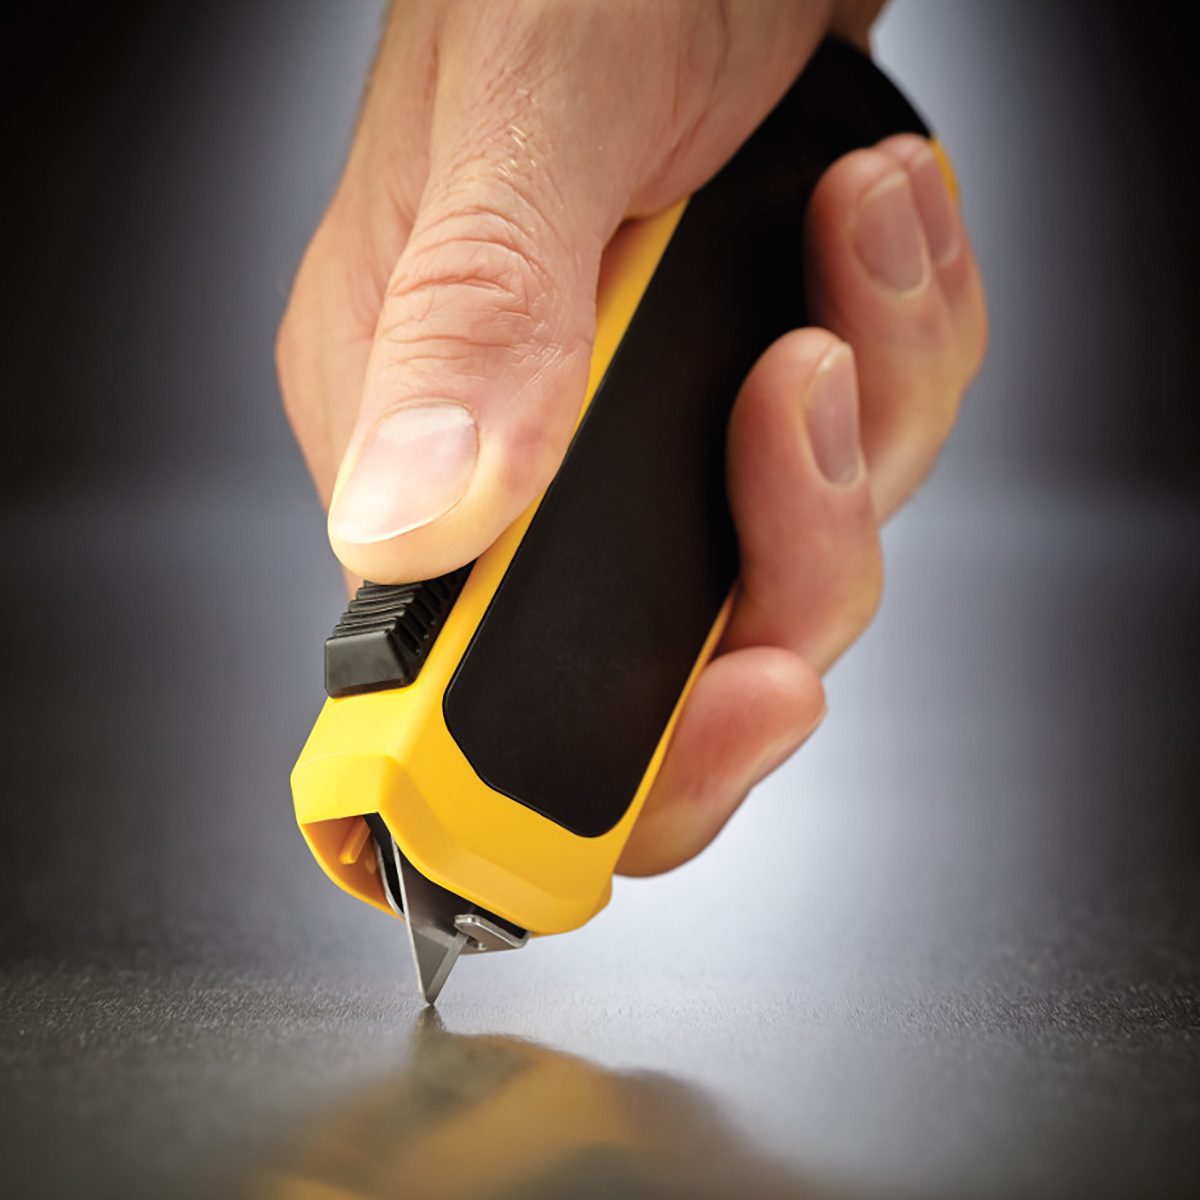 Holding the safety knife from OLFA with thumb on the release | Construction Pro Tips